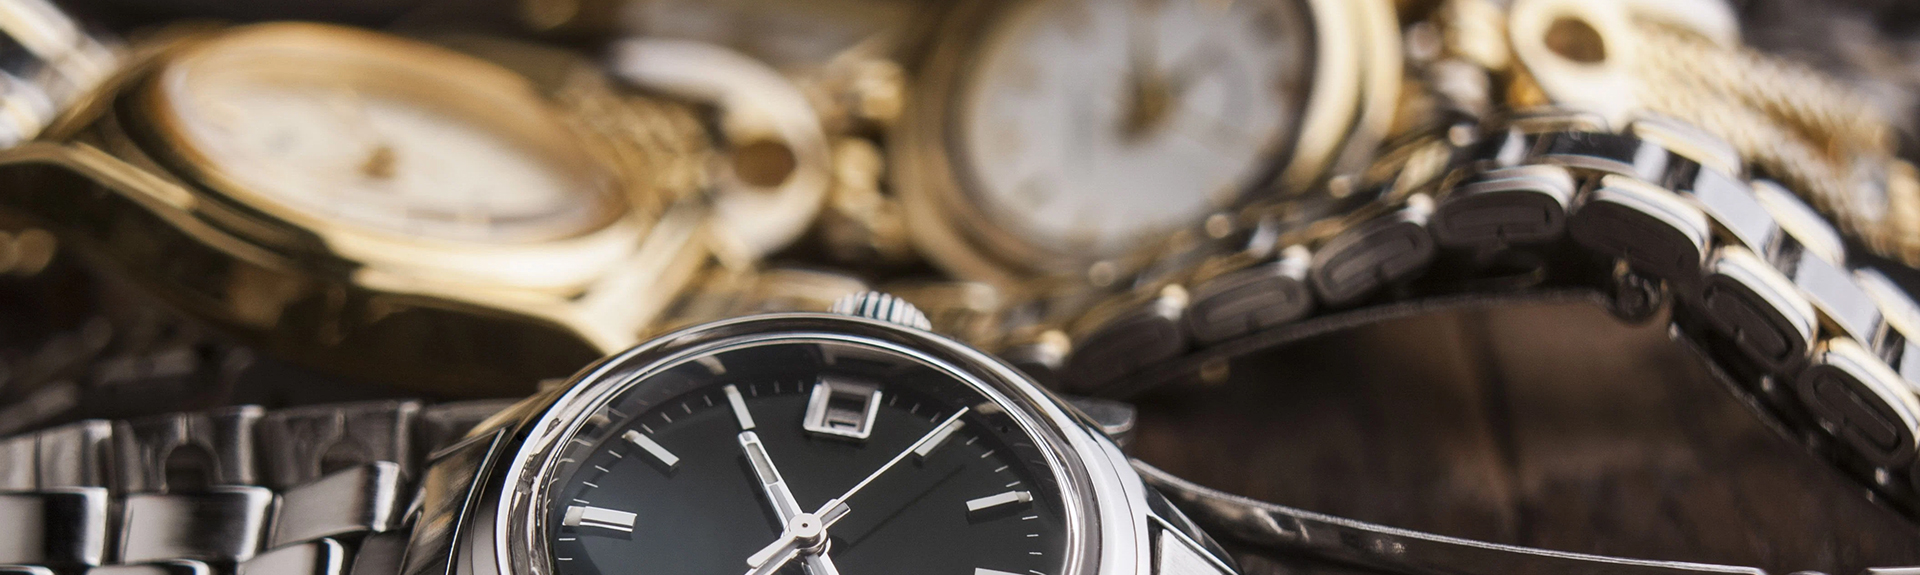 Kinds of Metals in Watch Making